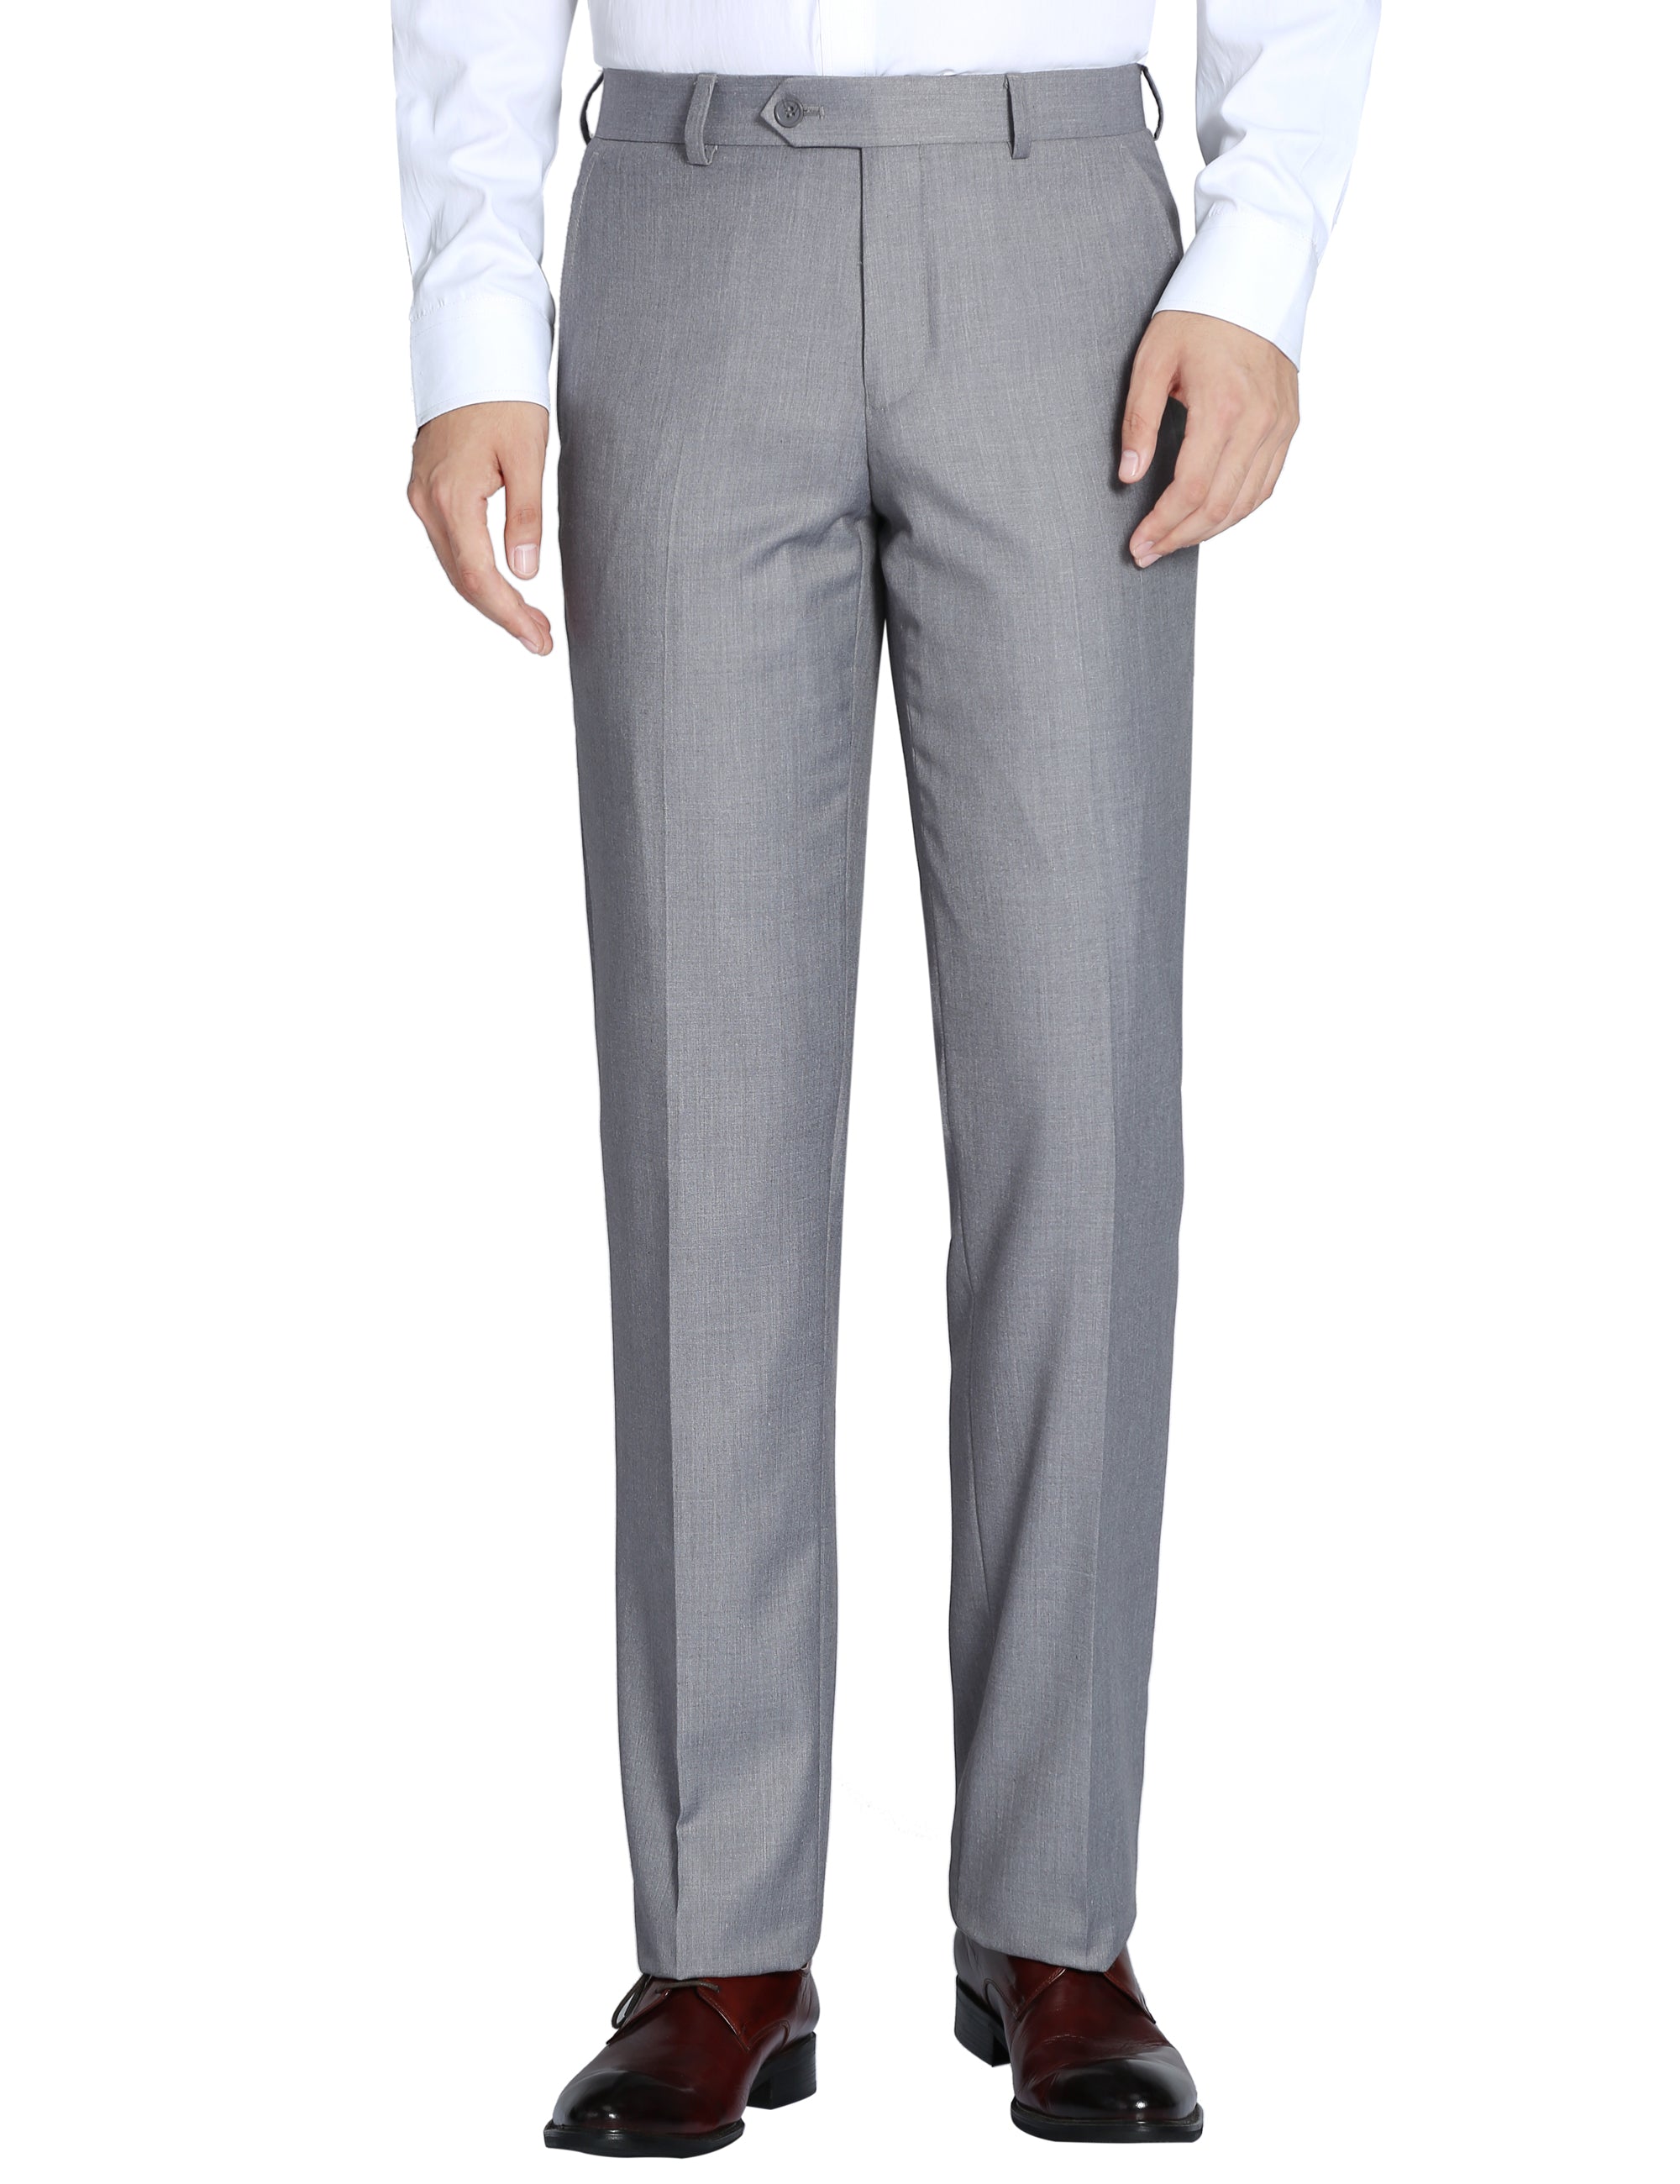 Buy JEENAY Synthetic Formal Pants for Men | Mens Fashion Wrinkle-free  Stylish Slim Fit Men's Wear Trouser Pant for Office or Party - 34 US, Light  Grey Online at Best Prices in